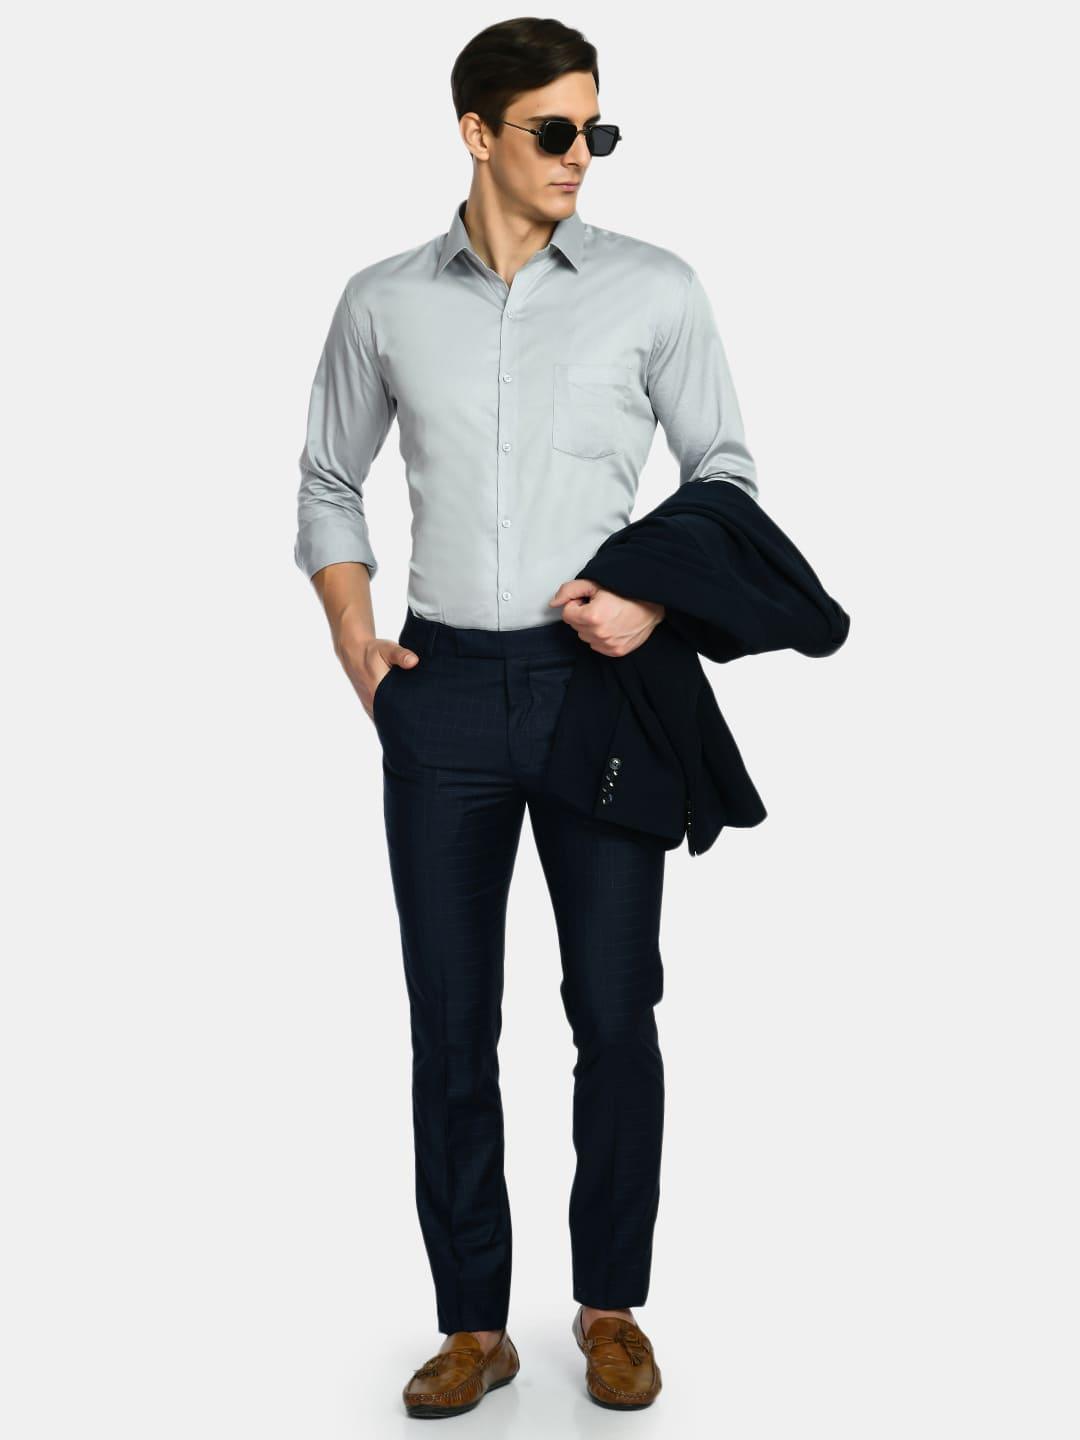 Solid Grey Formal Shirt with Curved Hemline